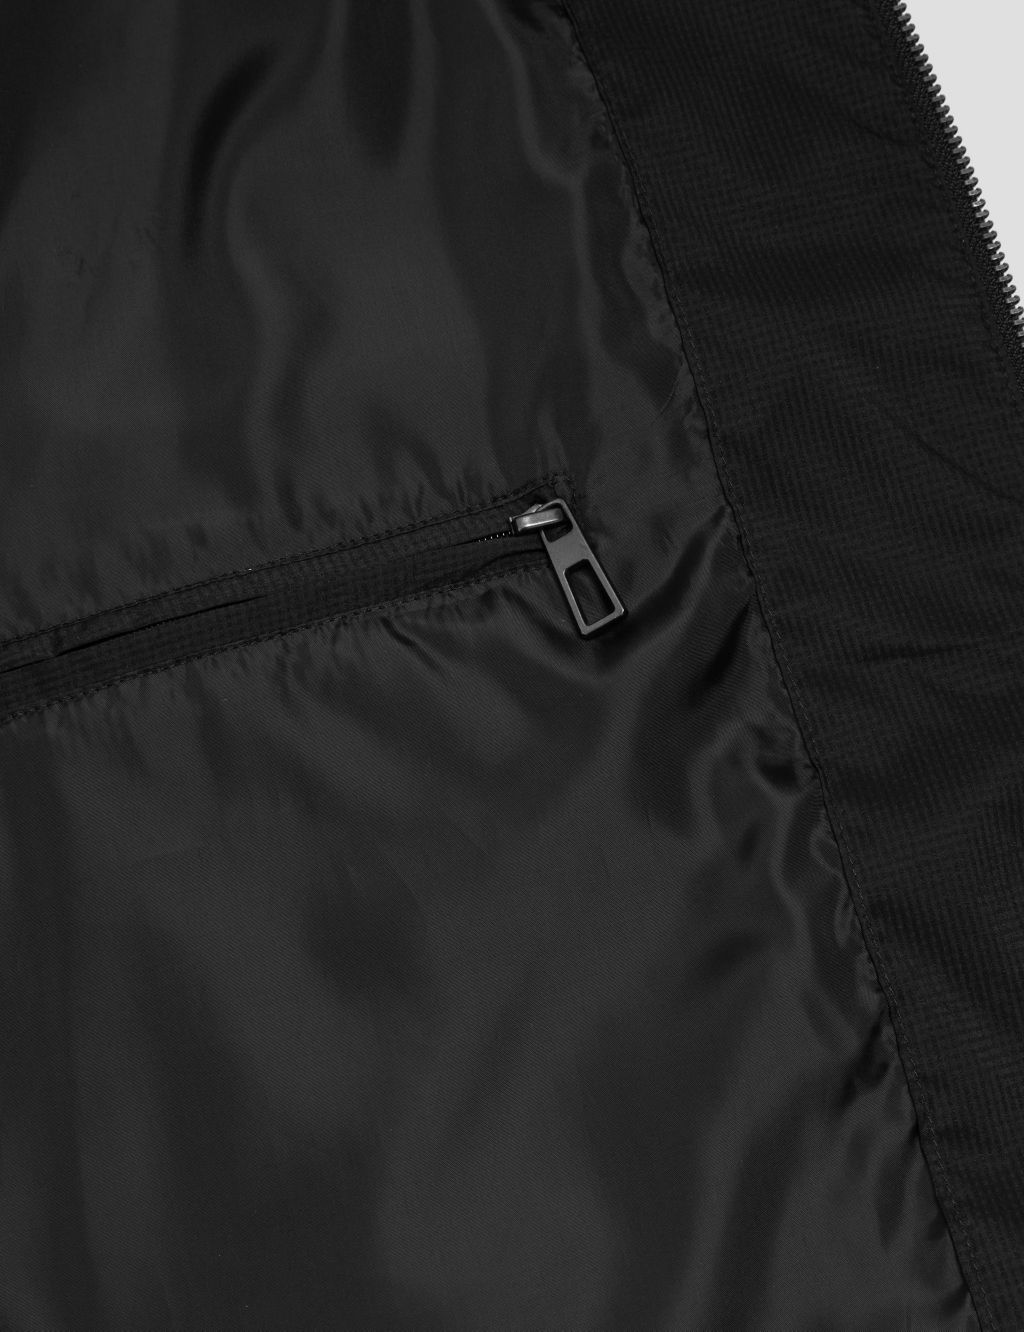 Bomber Jacket with Stormwear | Autograph | M&S